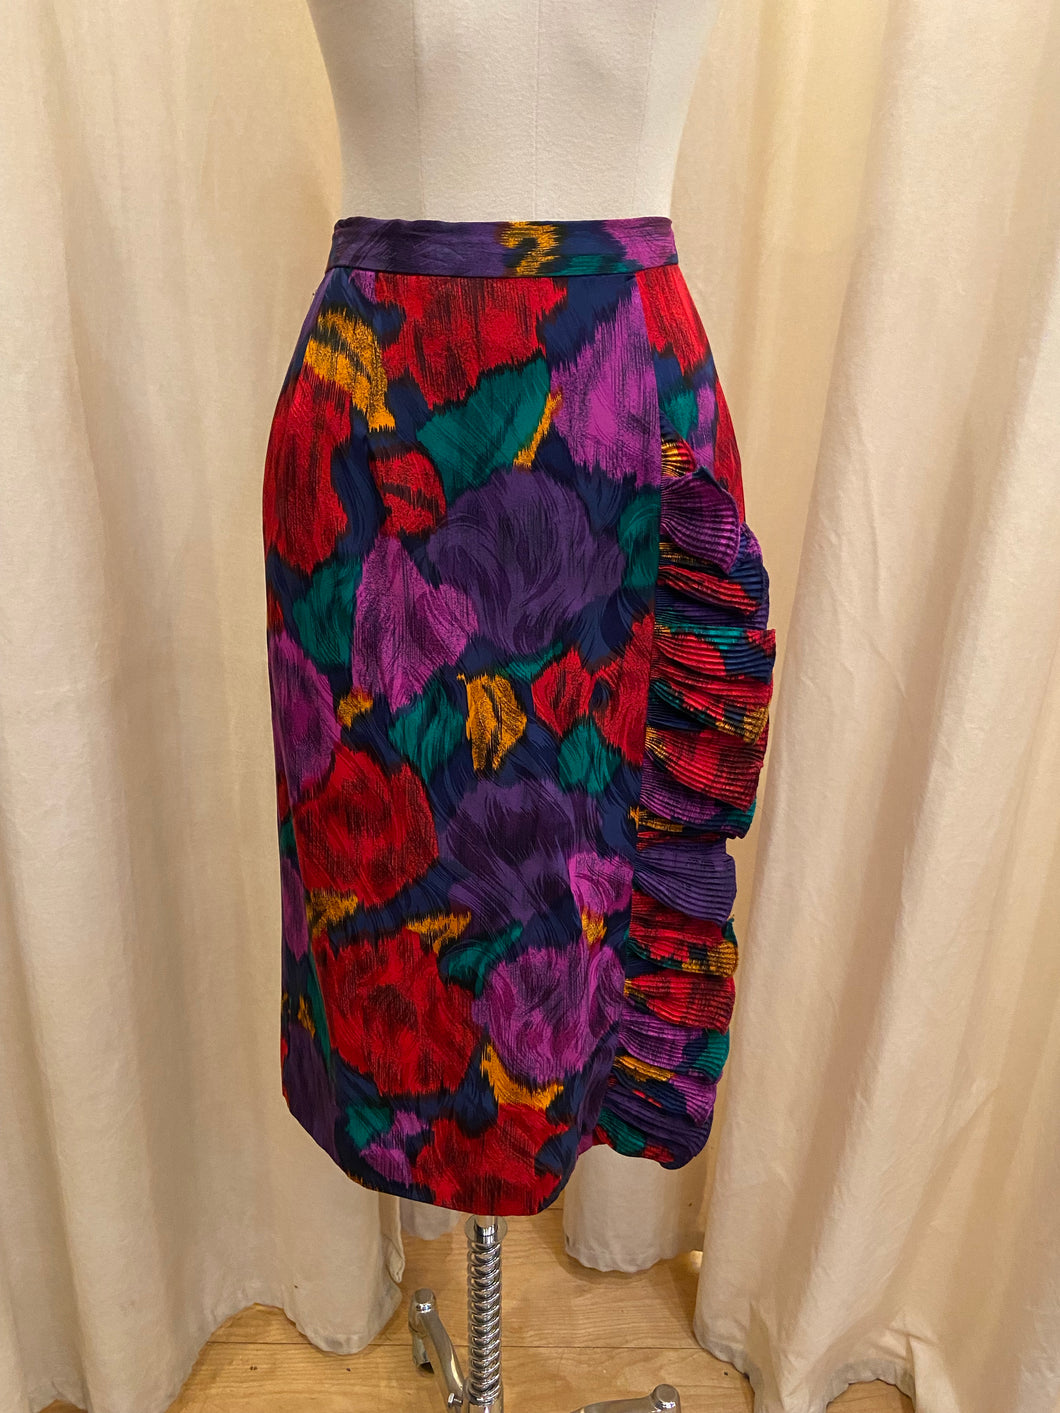 Vintage 80s Raul Blanco jewel tone abstract floral skirt with ruffle detail